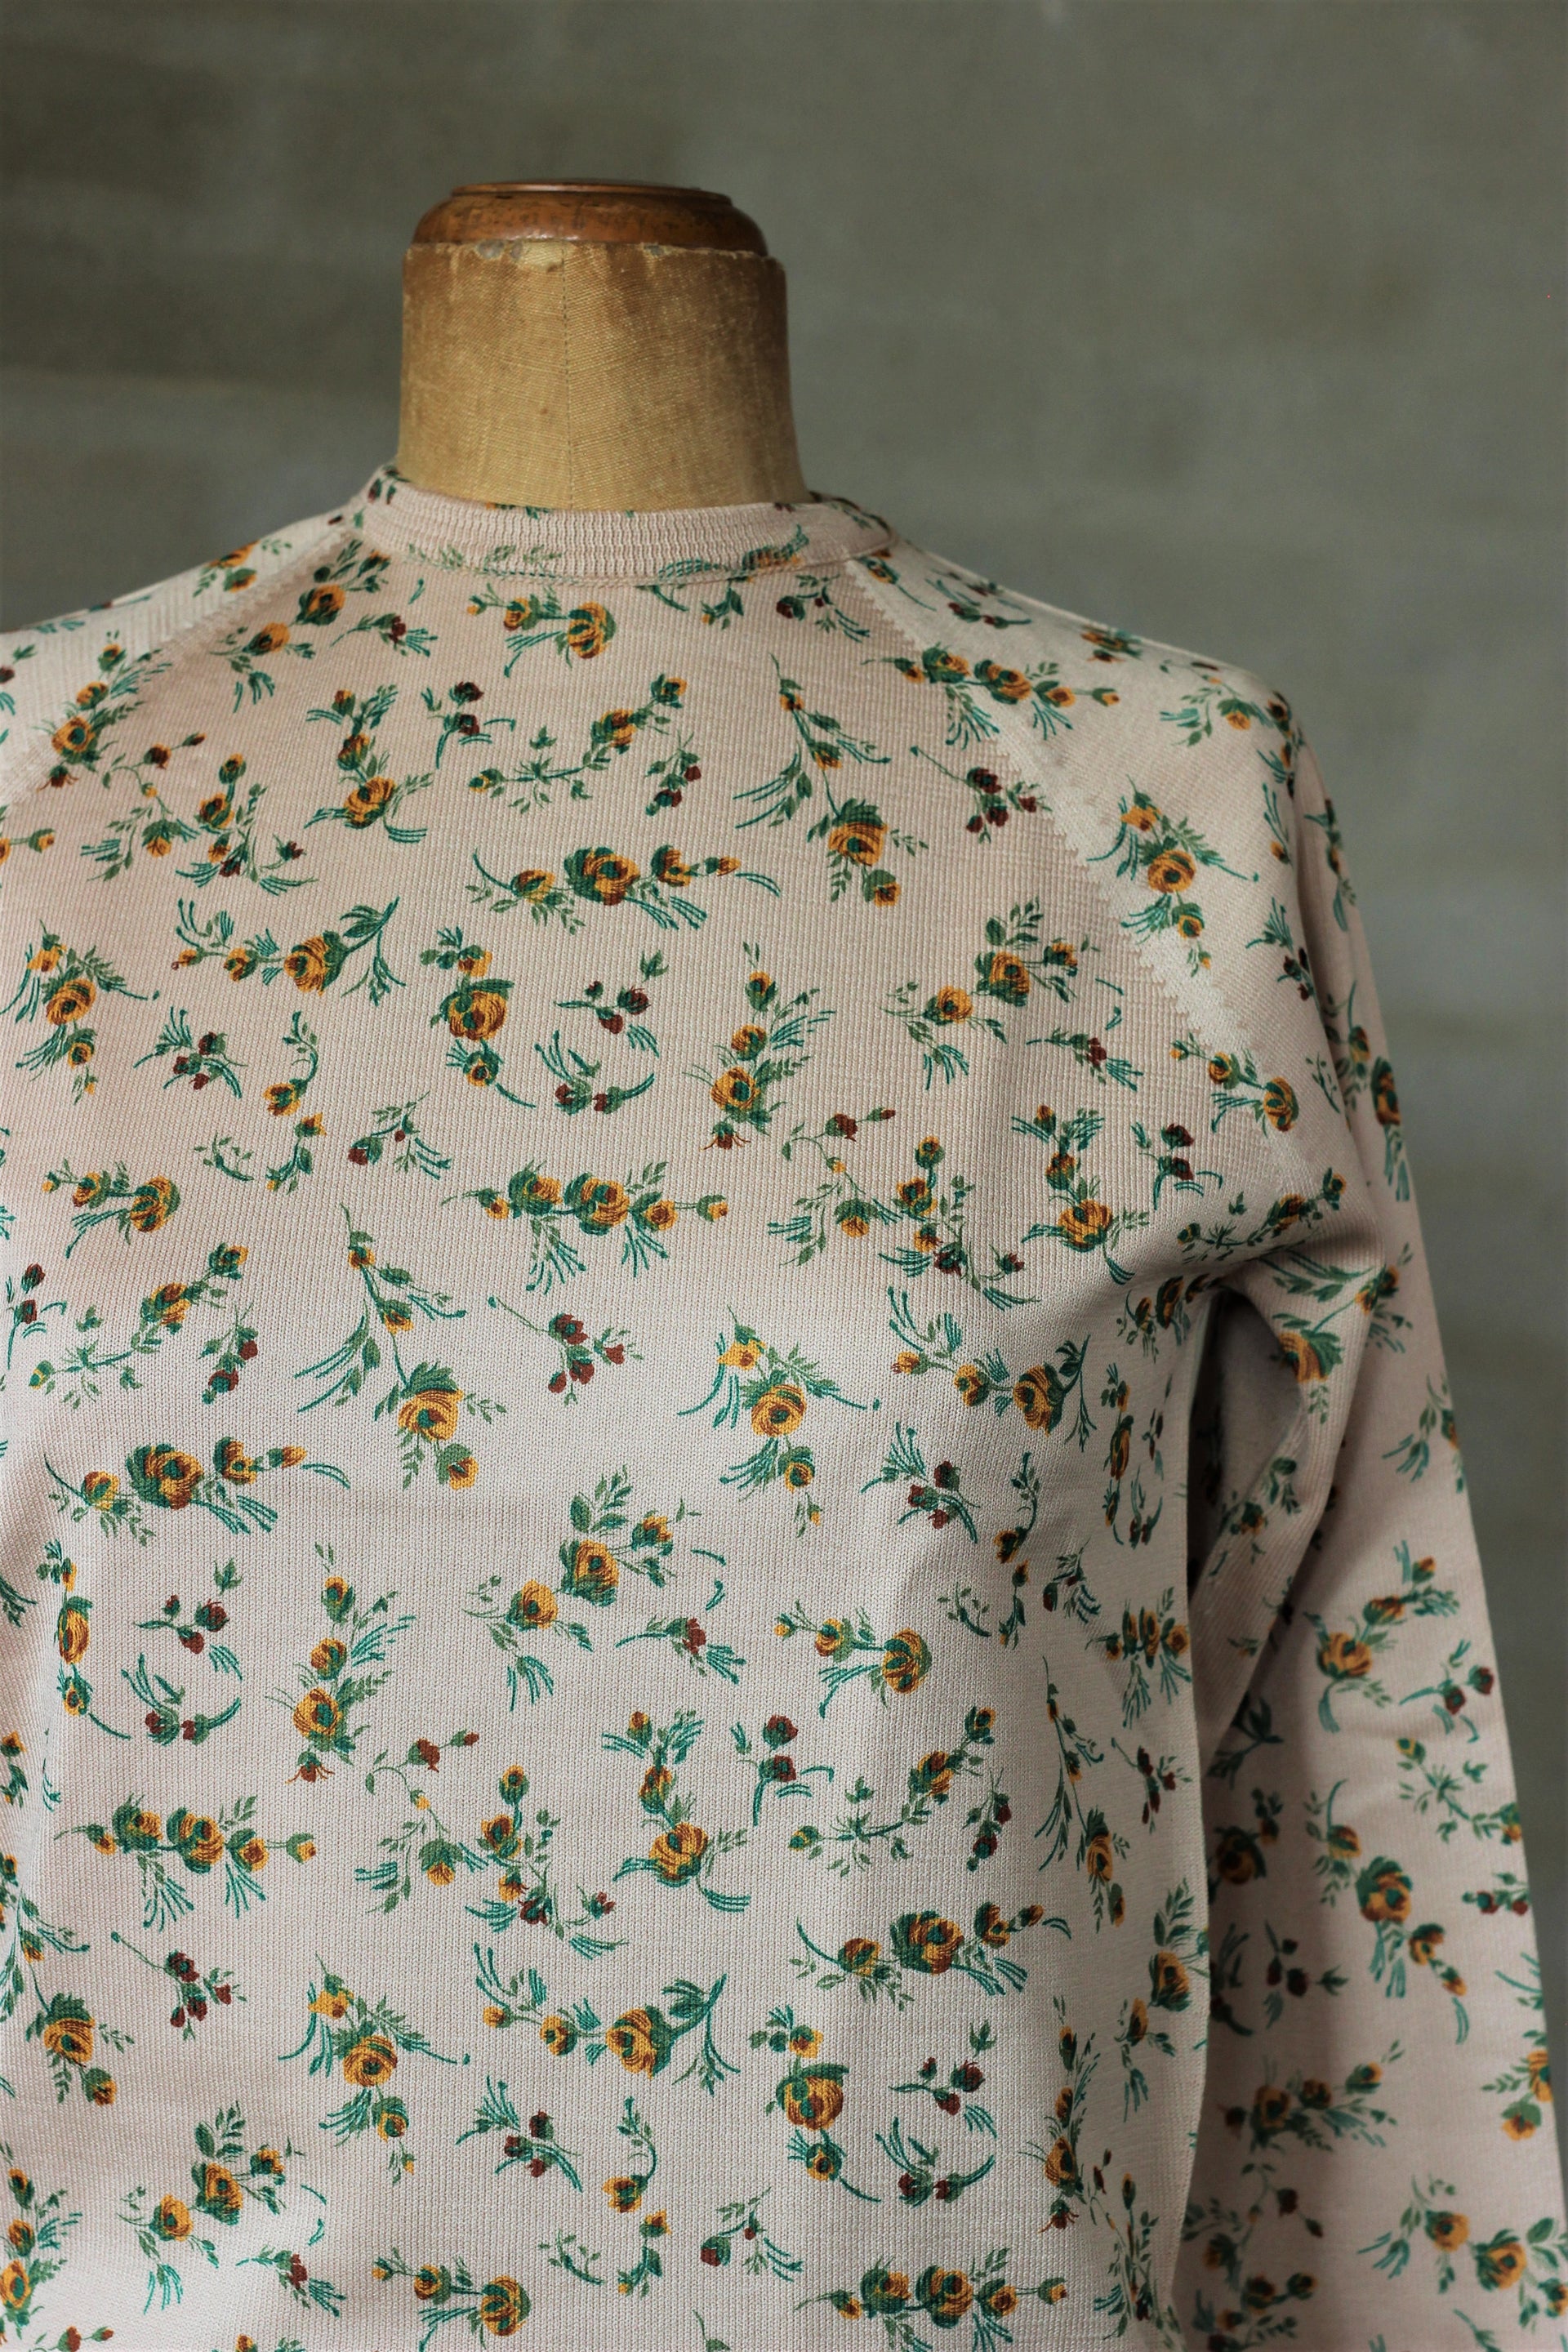 1970s DEADSTOCK Vtg. Top With Yellow Green Rose Pattern//Size S